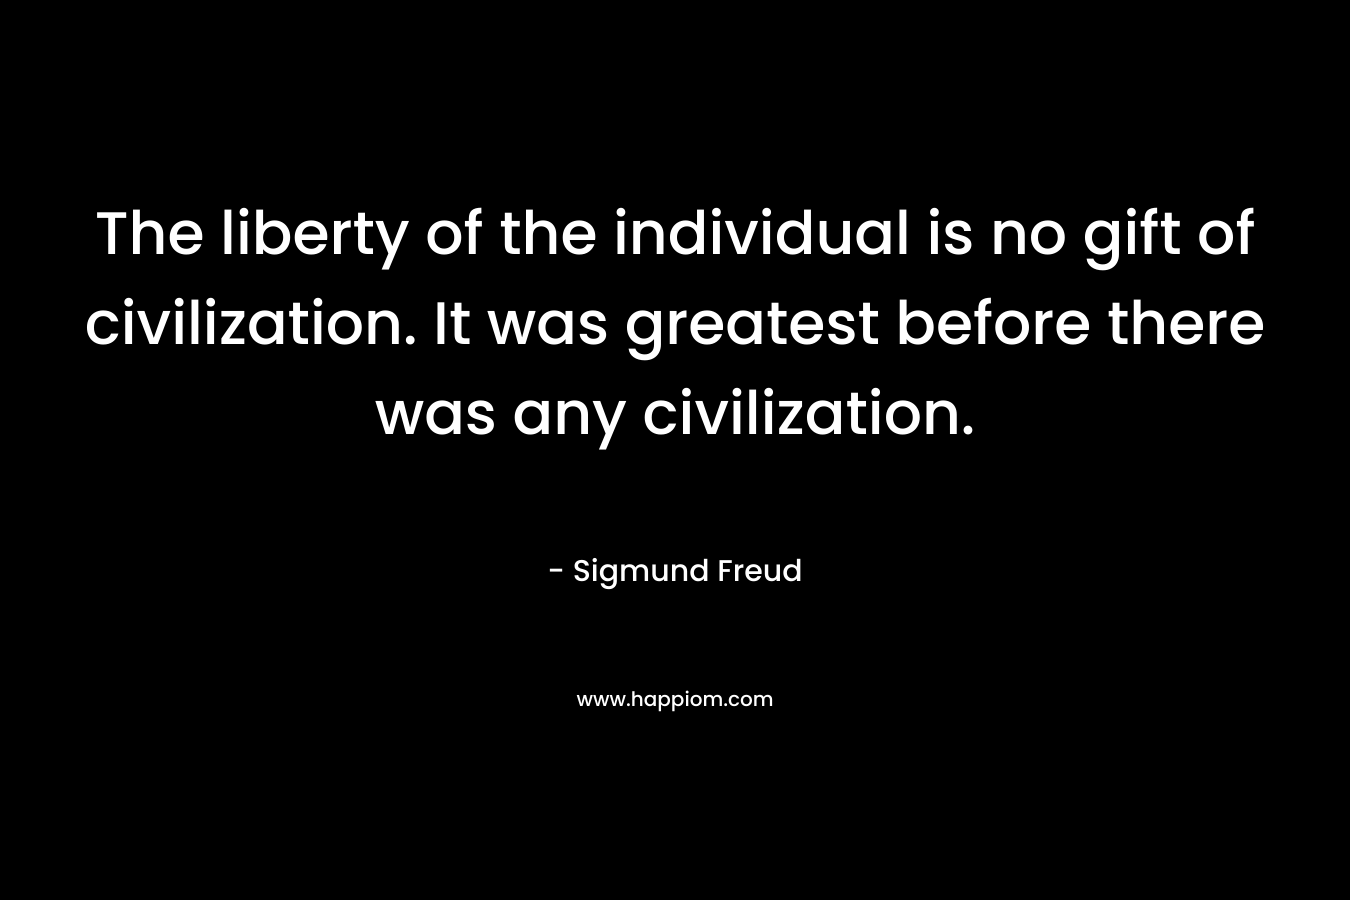 The liberty of the individual is no gift of civilization. It was greatest before there was any civilization. – Sigmund Freud